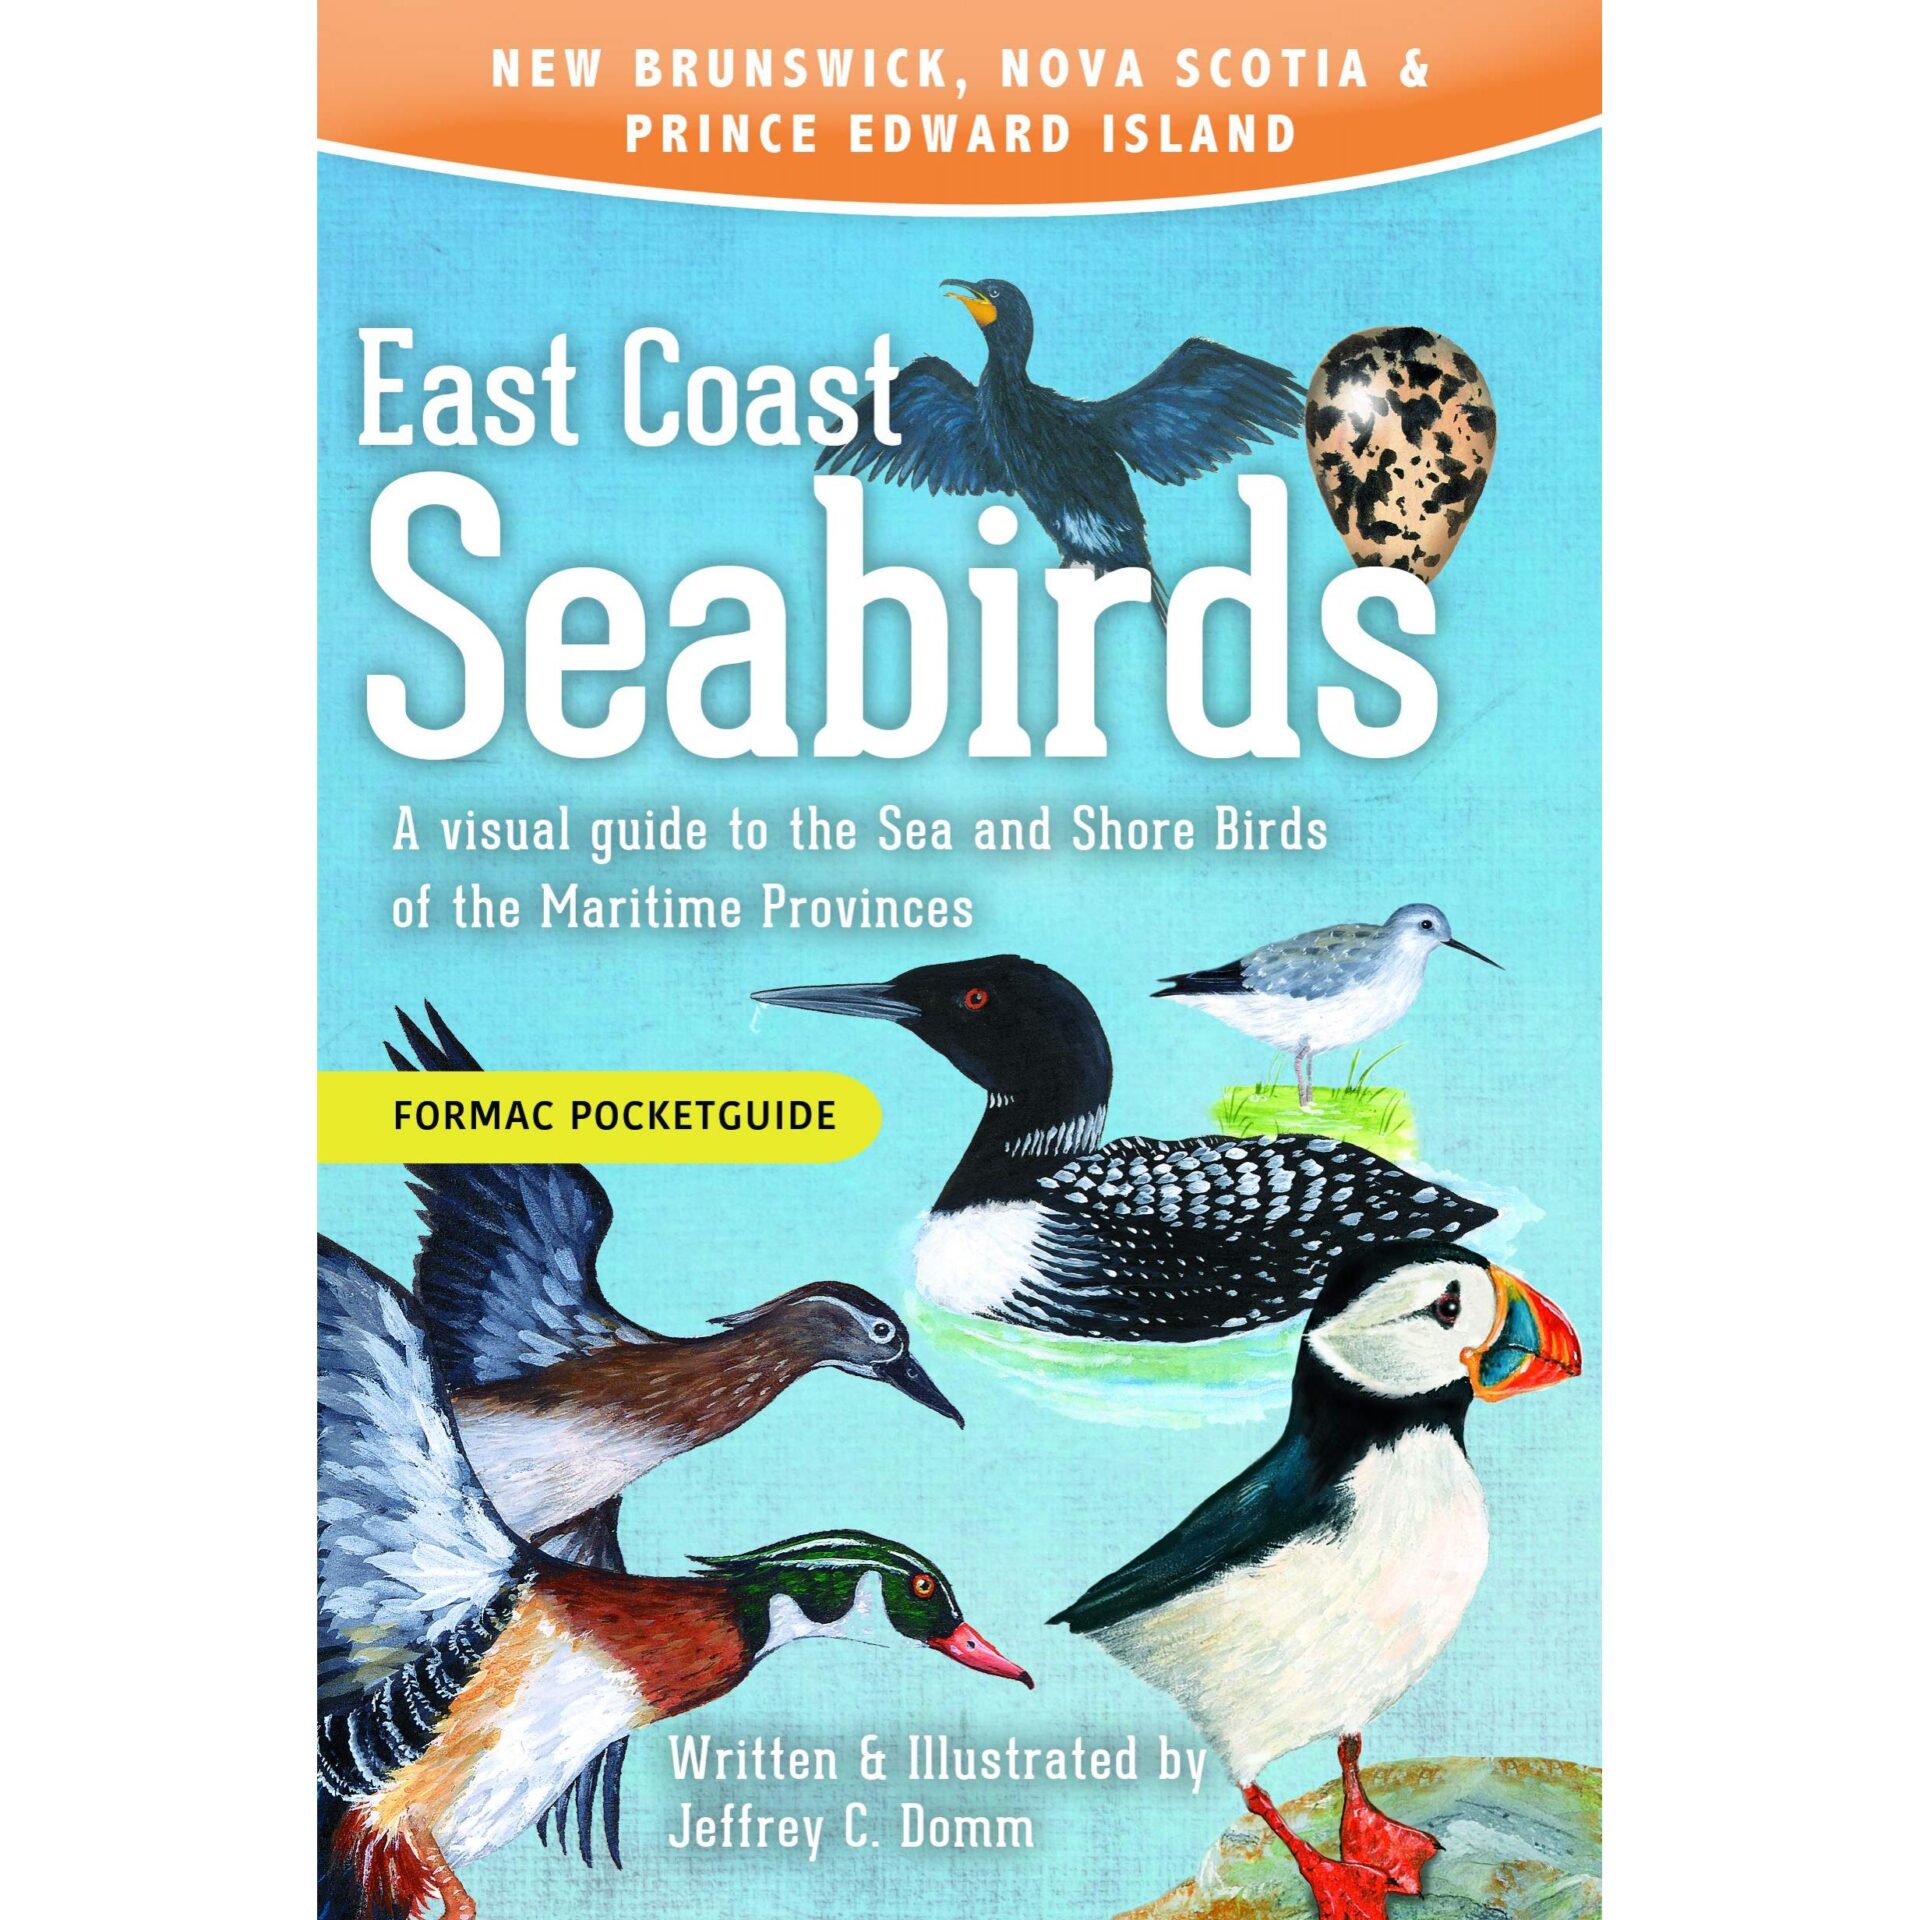 East Coast Seabirds: A visual guide to the Sea and Shore Birds of the Maritime Provinces